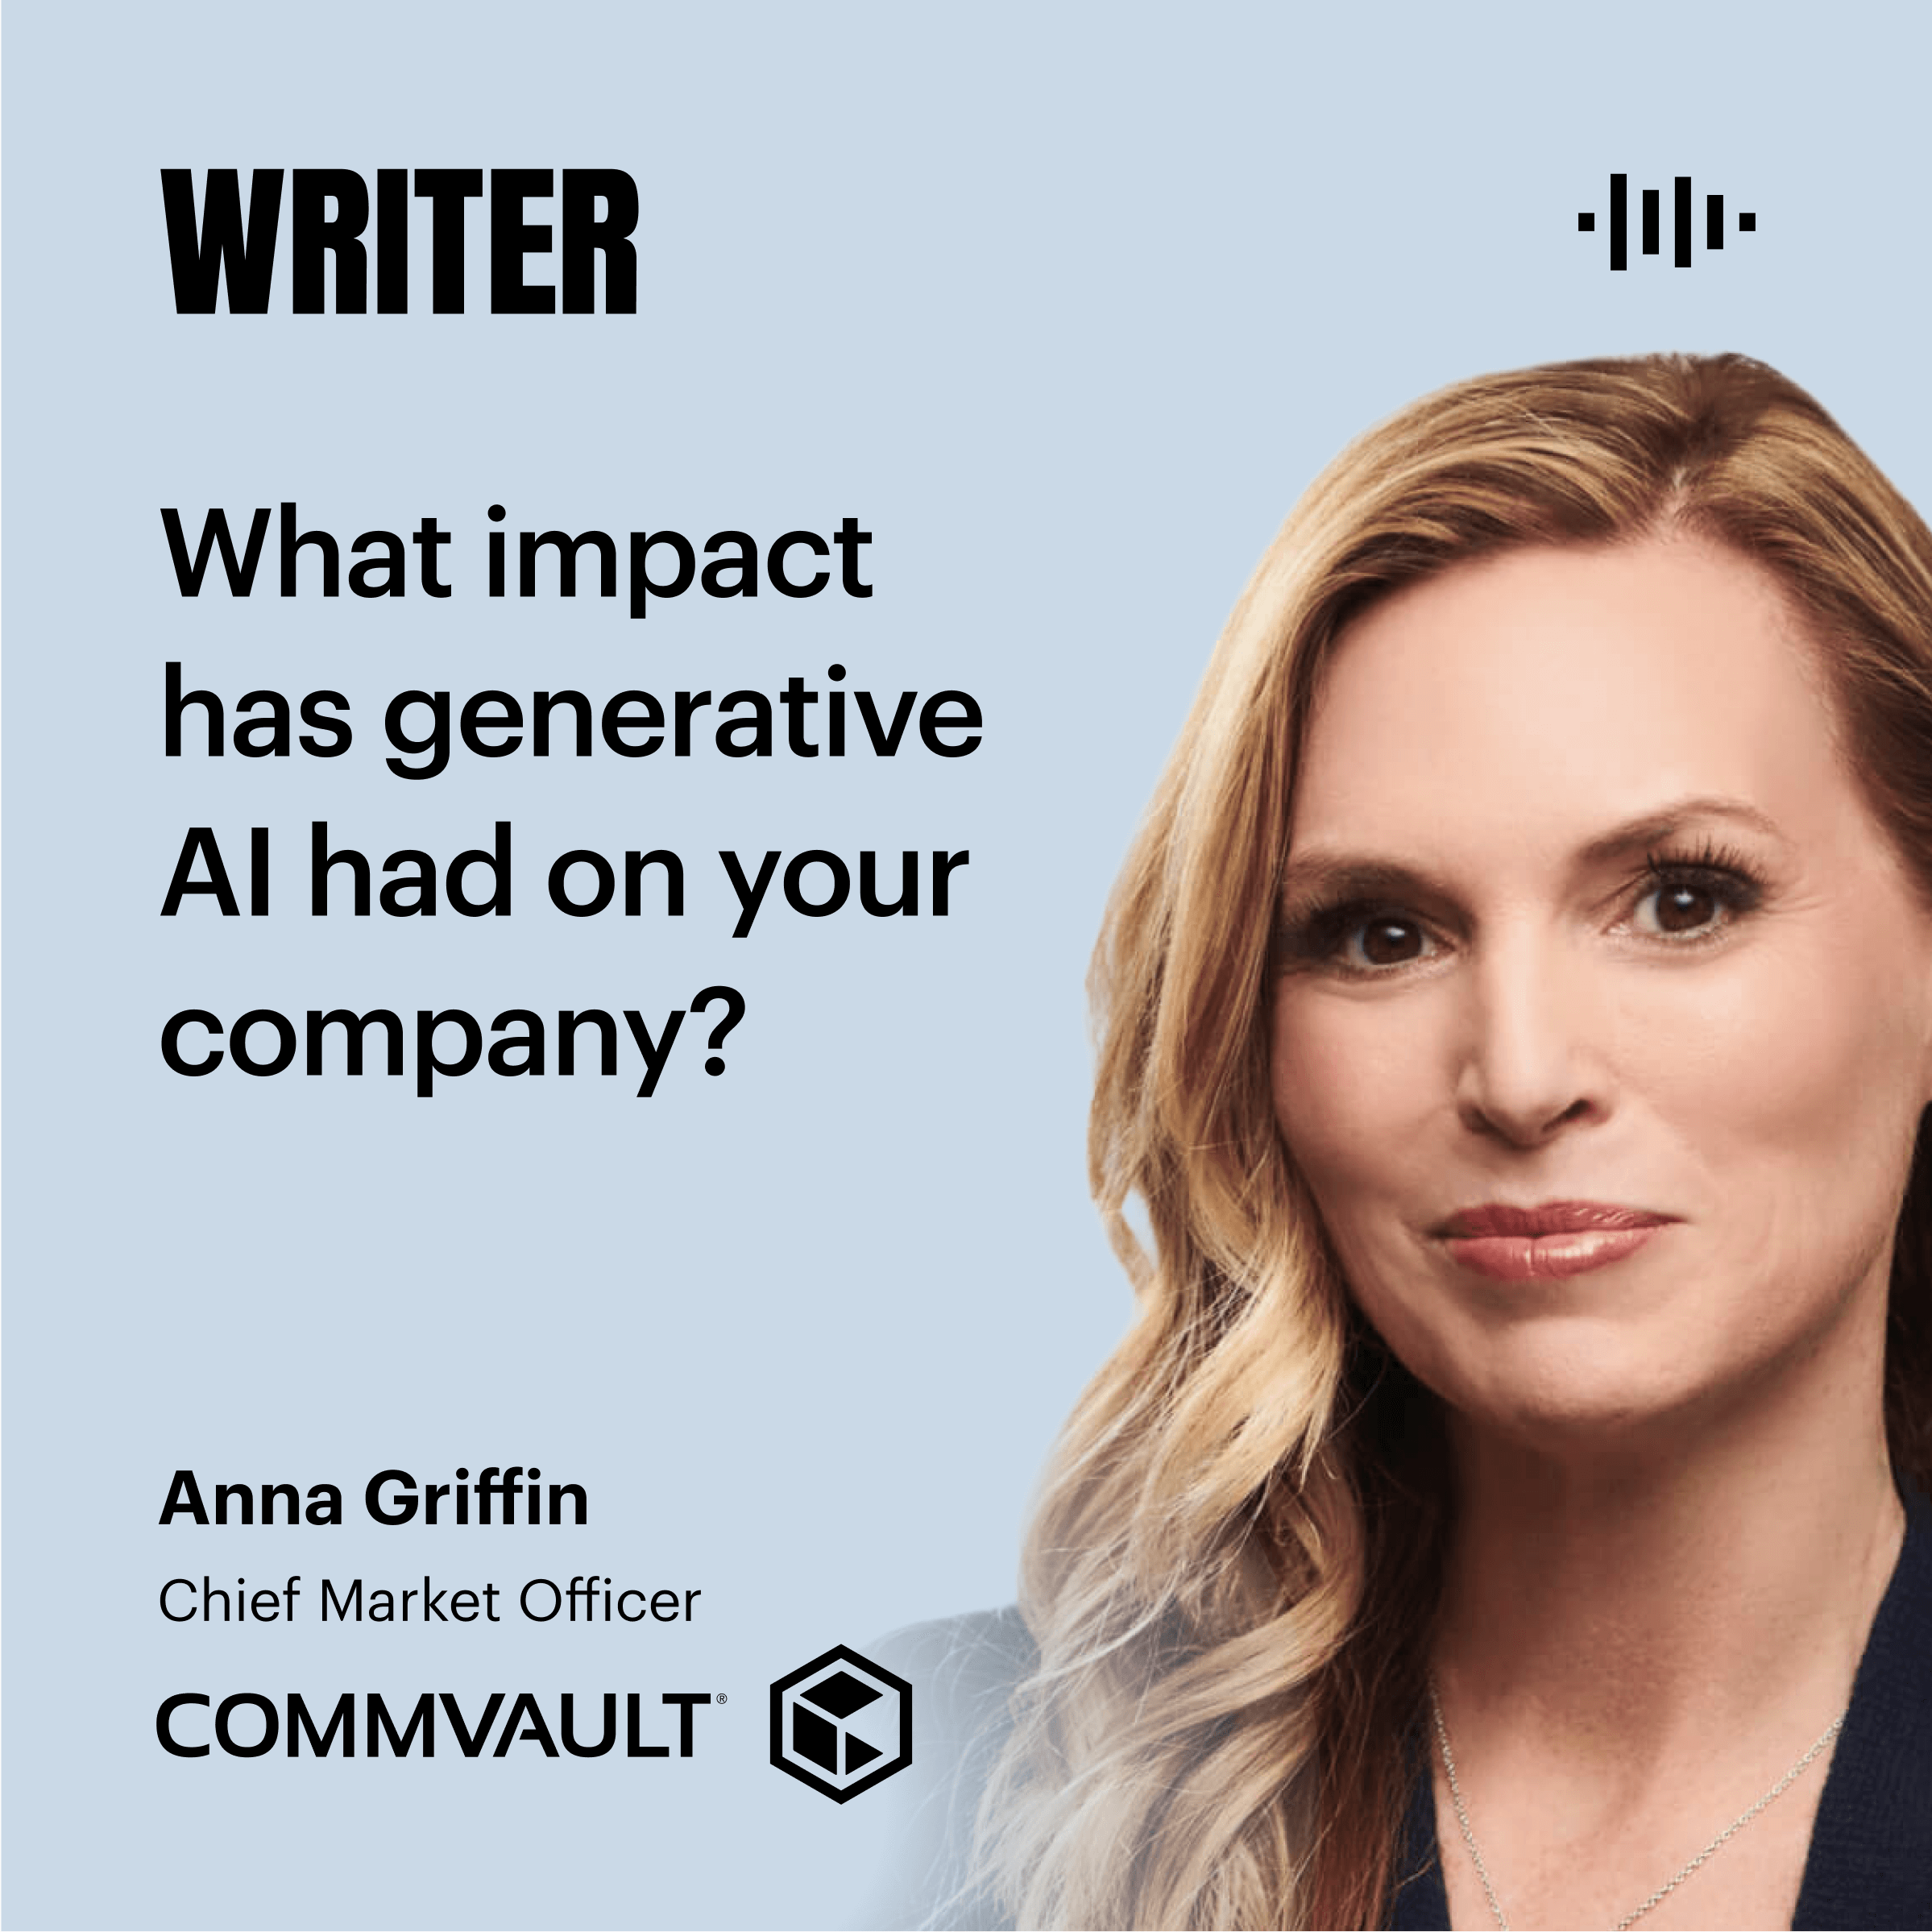 What impact has generative AI had on your company?